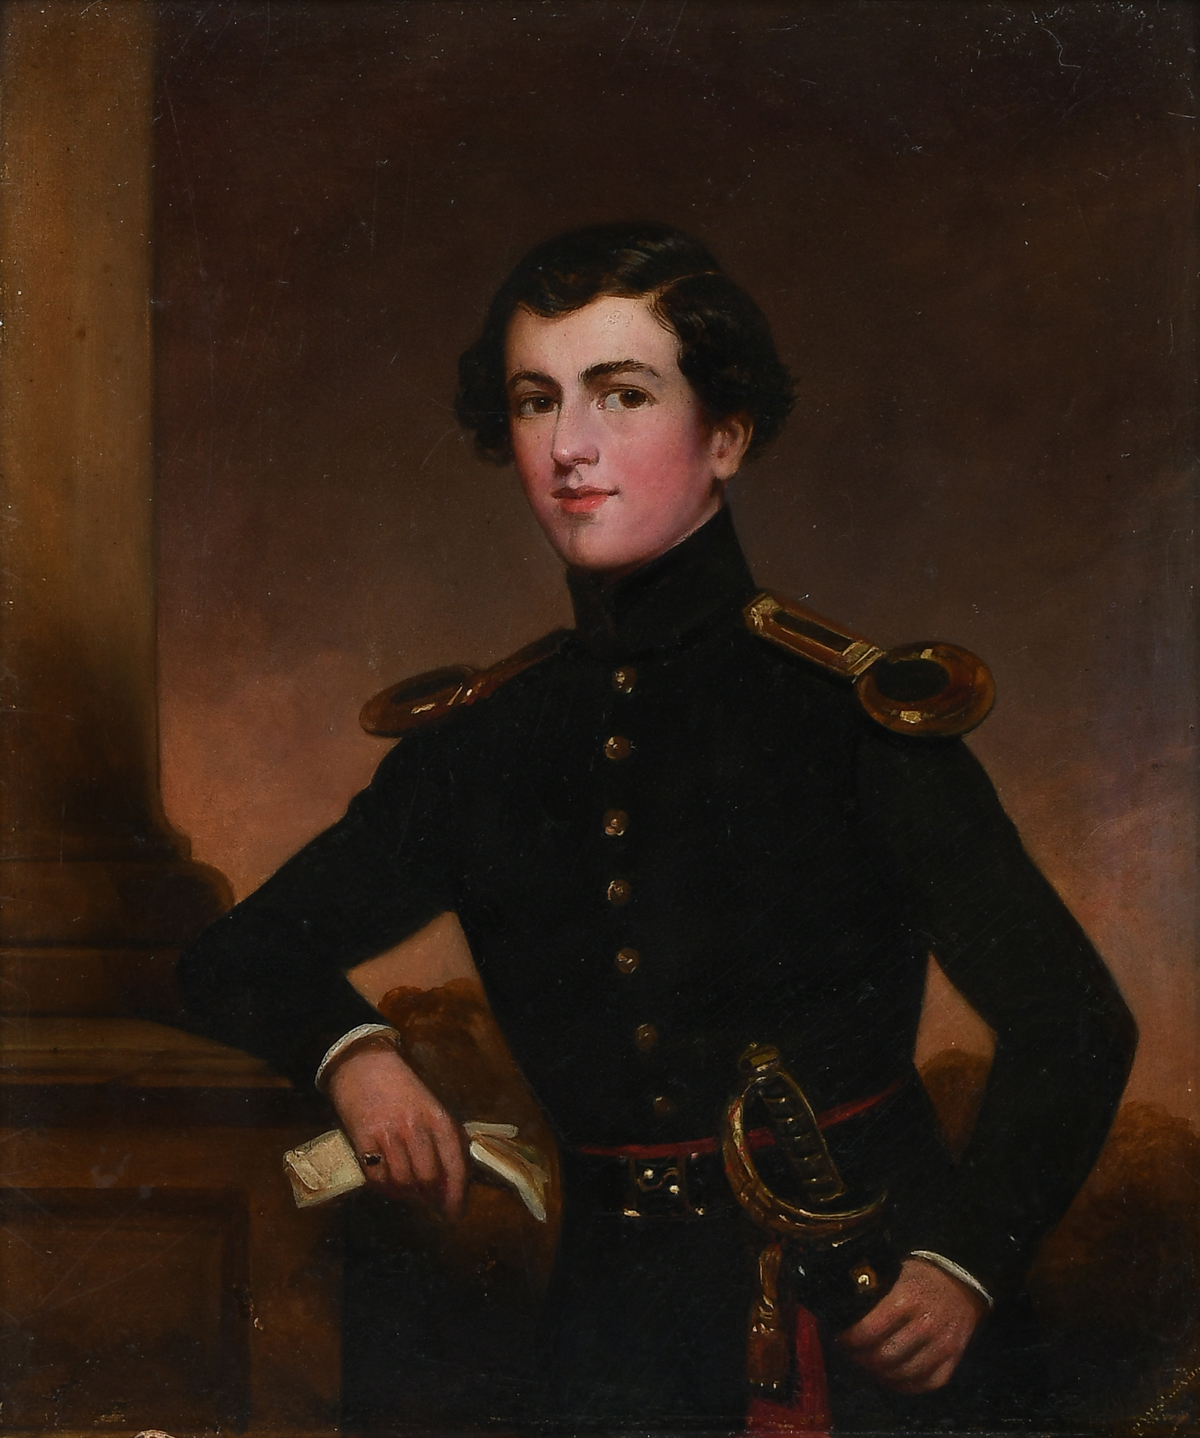 MILITARY PORTRAIT PAINTING OF A